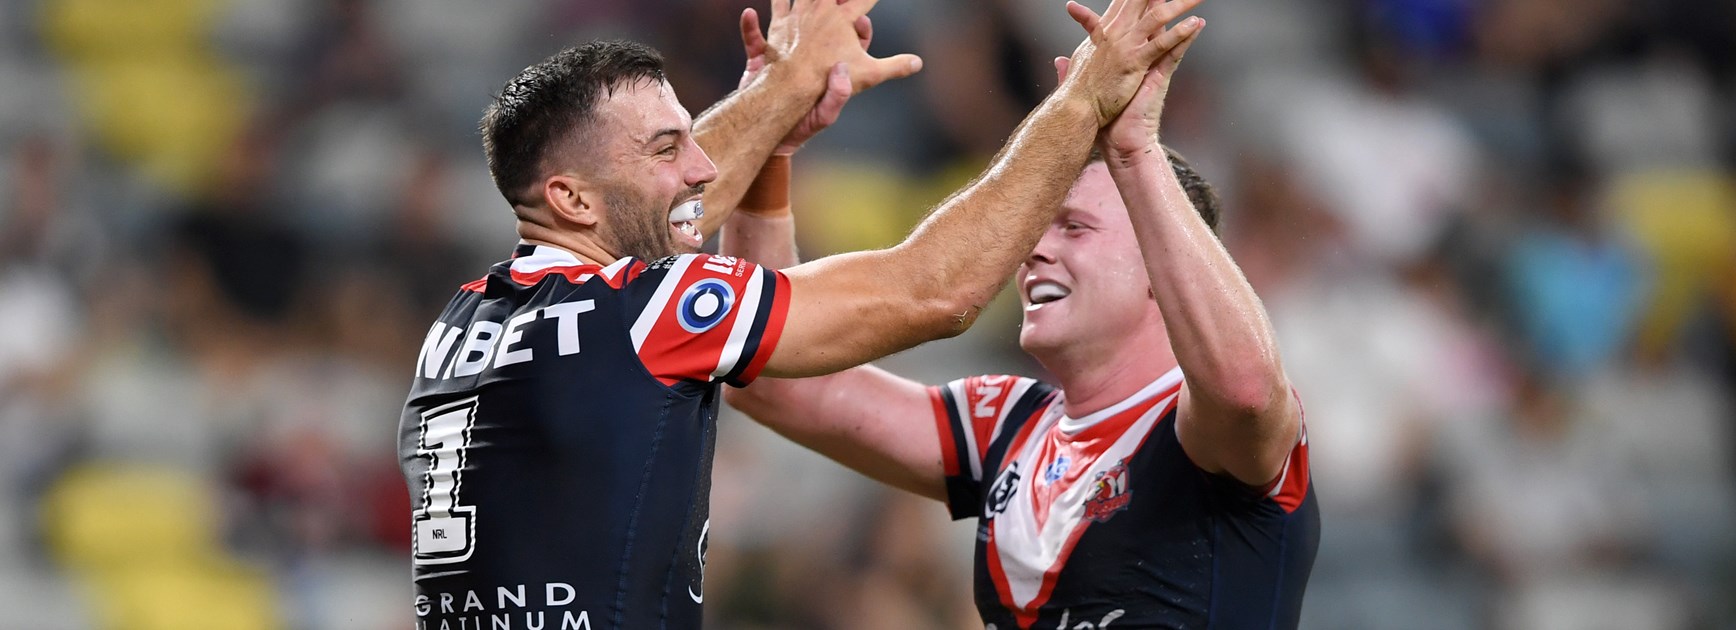 'They don't rate us': How injury toll eased pressure for revitalised Roosters